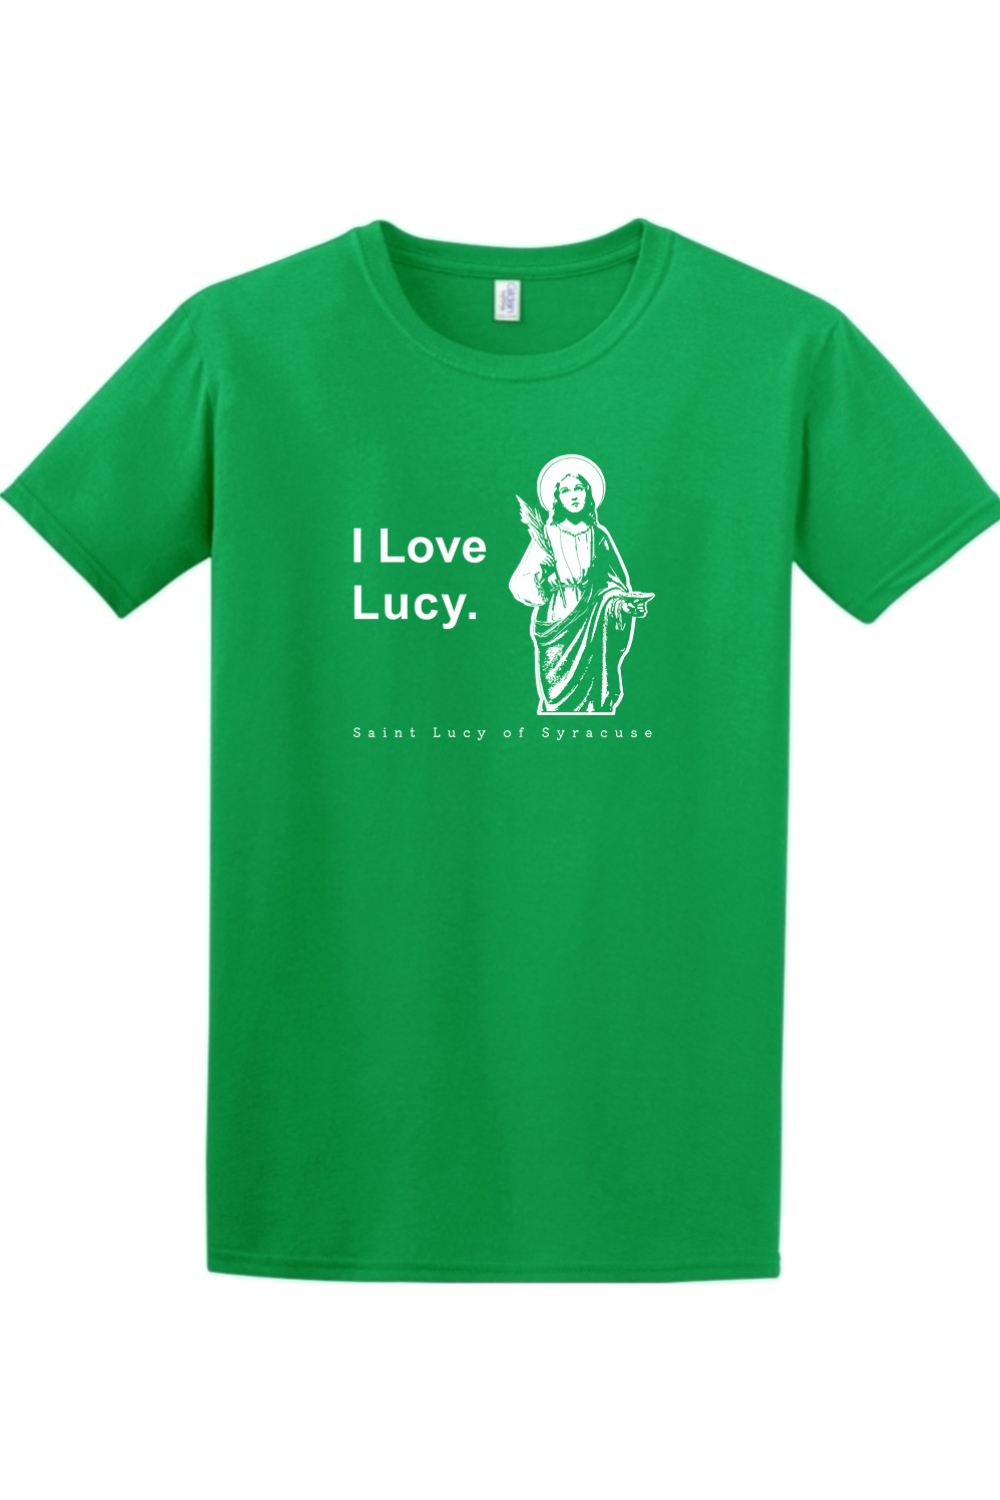 I Love Lucy - St Lucy of Syracuse Adult T-Shirt